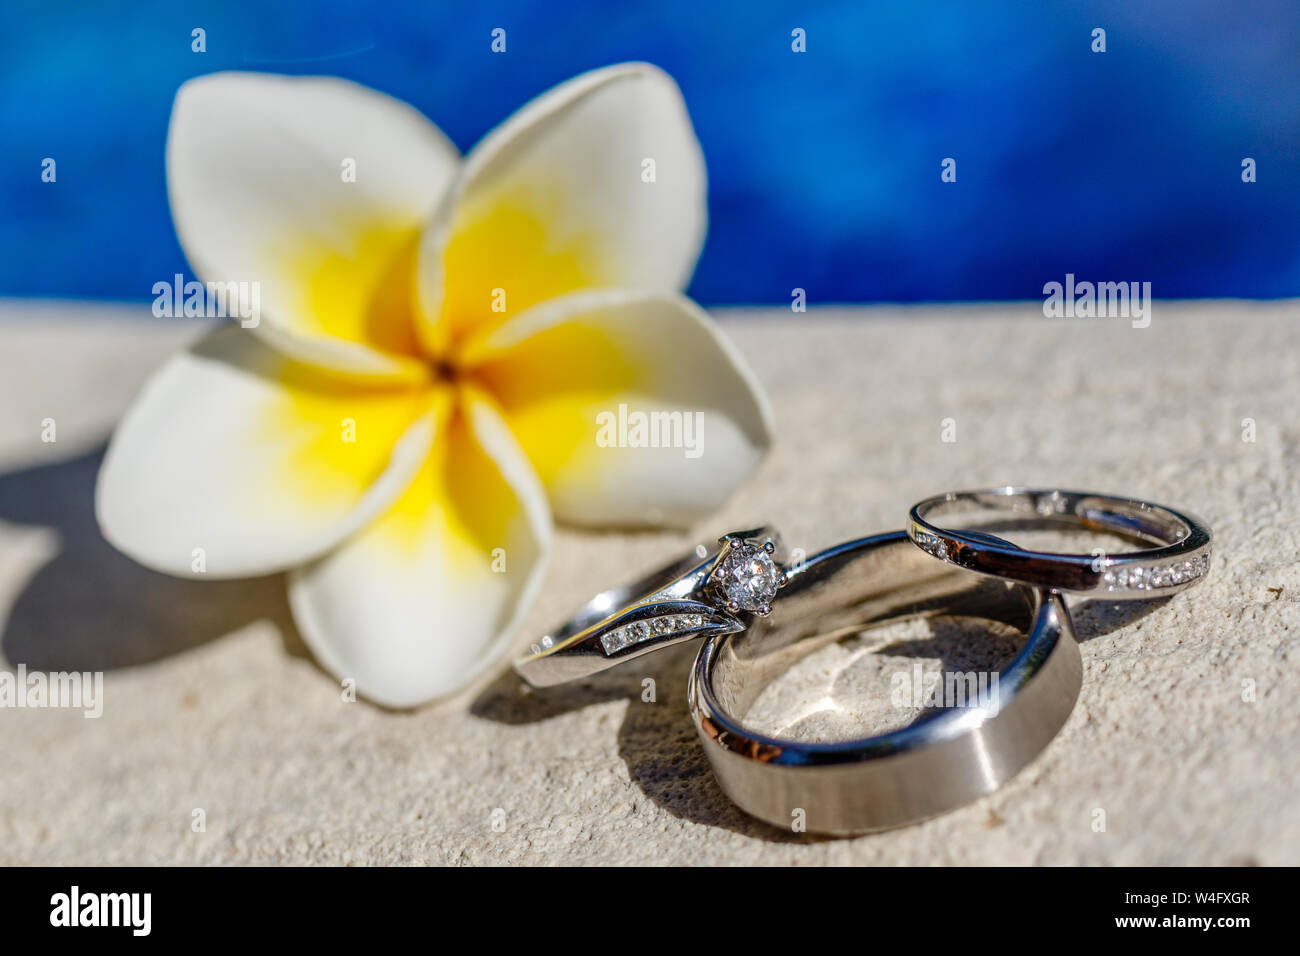 Bride and groom white gold wedding rings and a engagement ring near Frangipani (Plumeria) flower on the edge of the swimming pool. Stock Photo